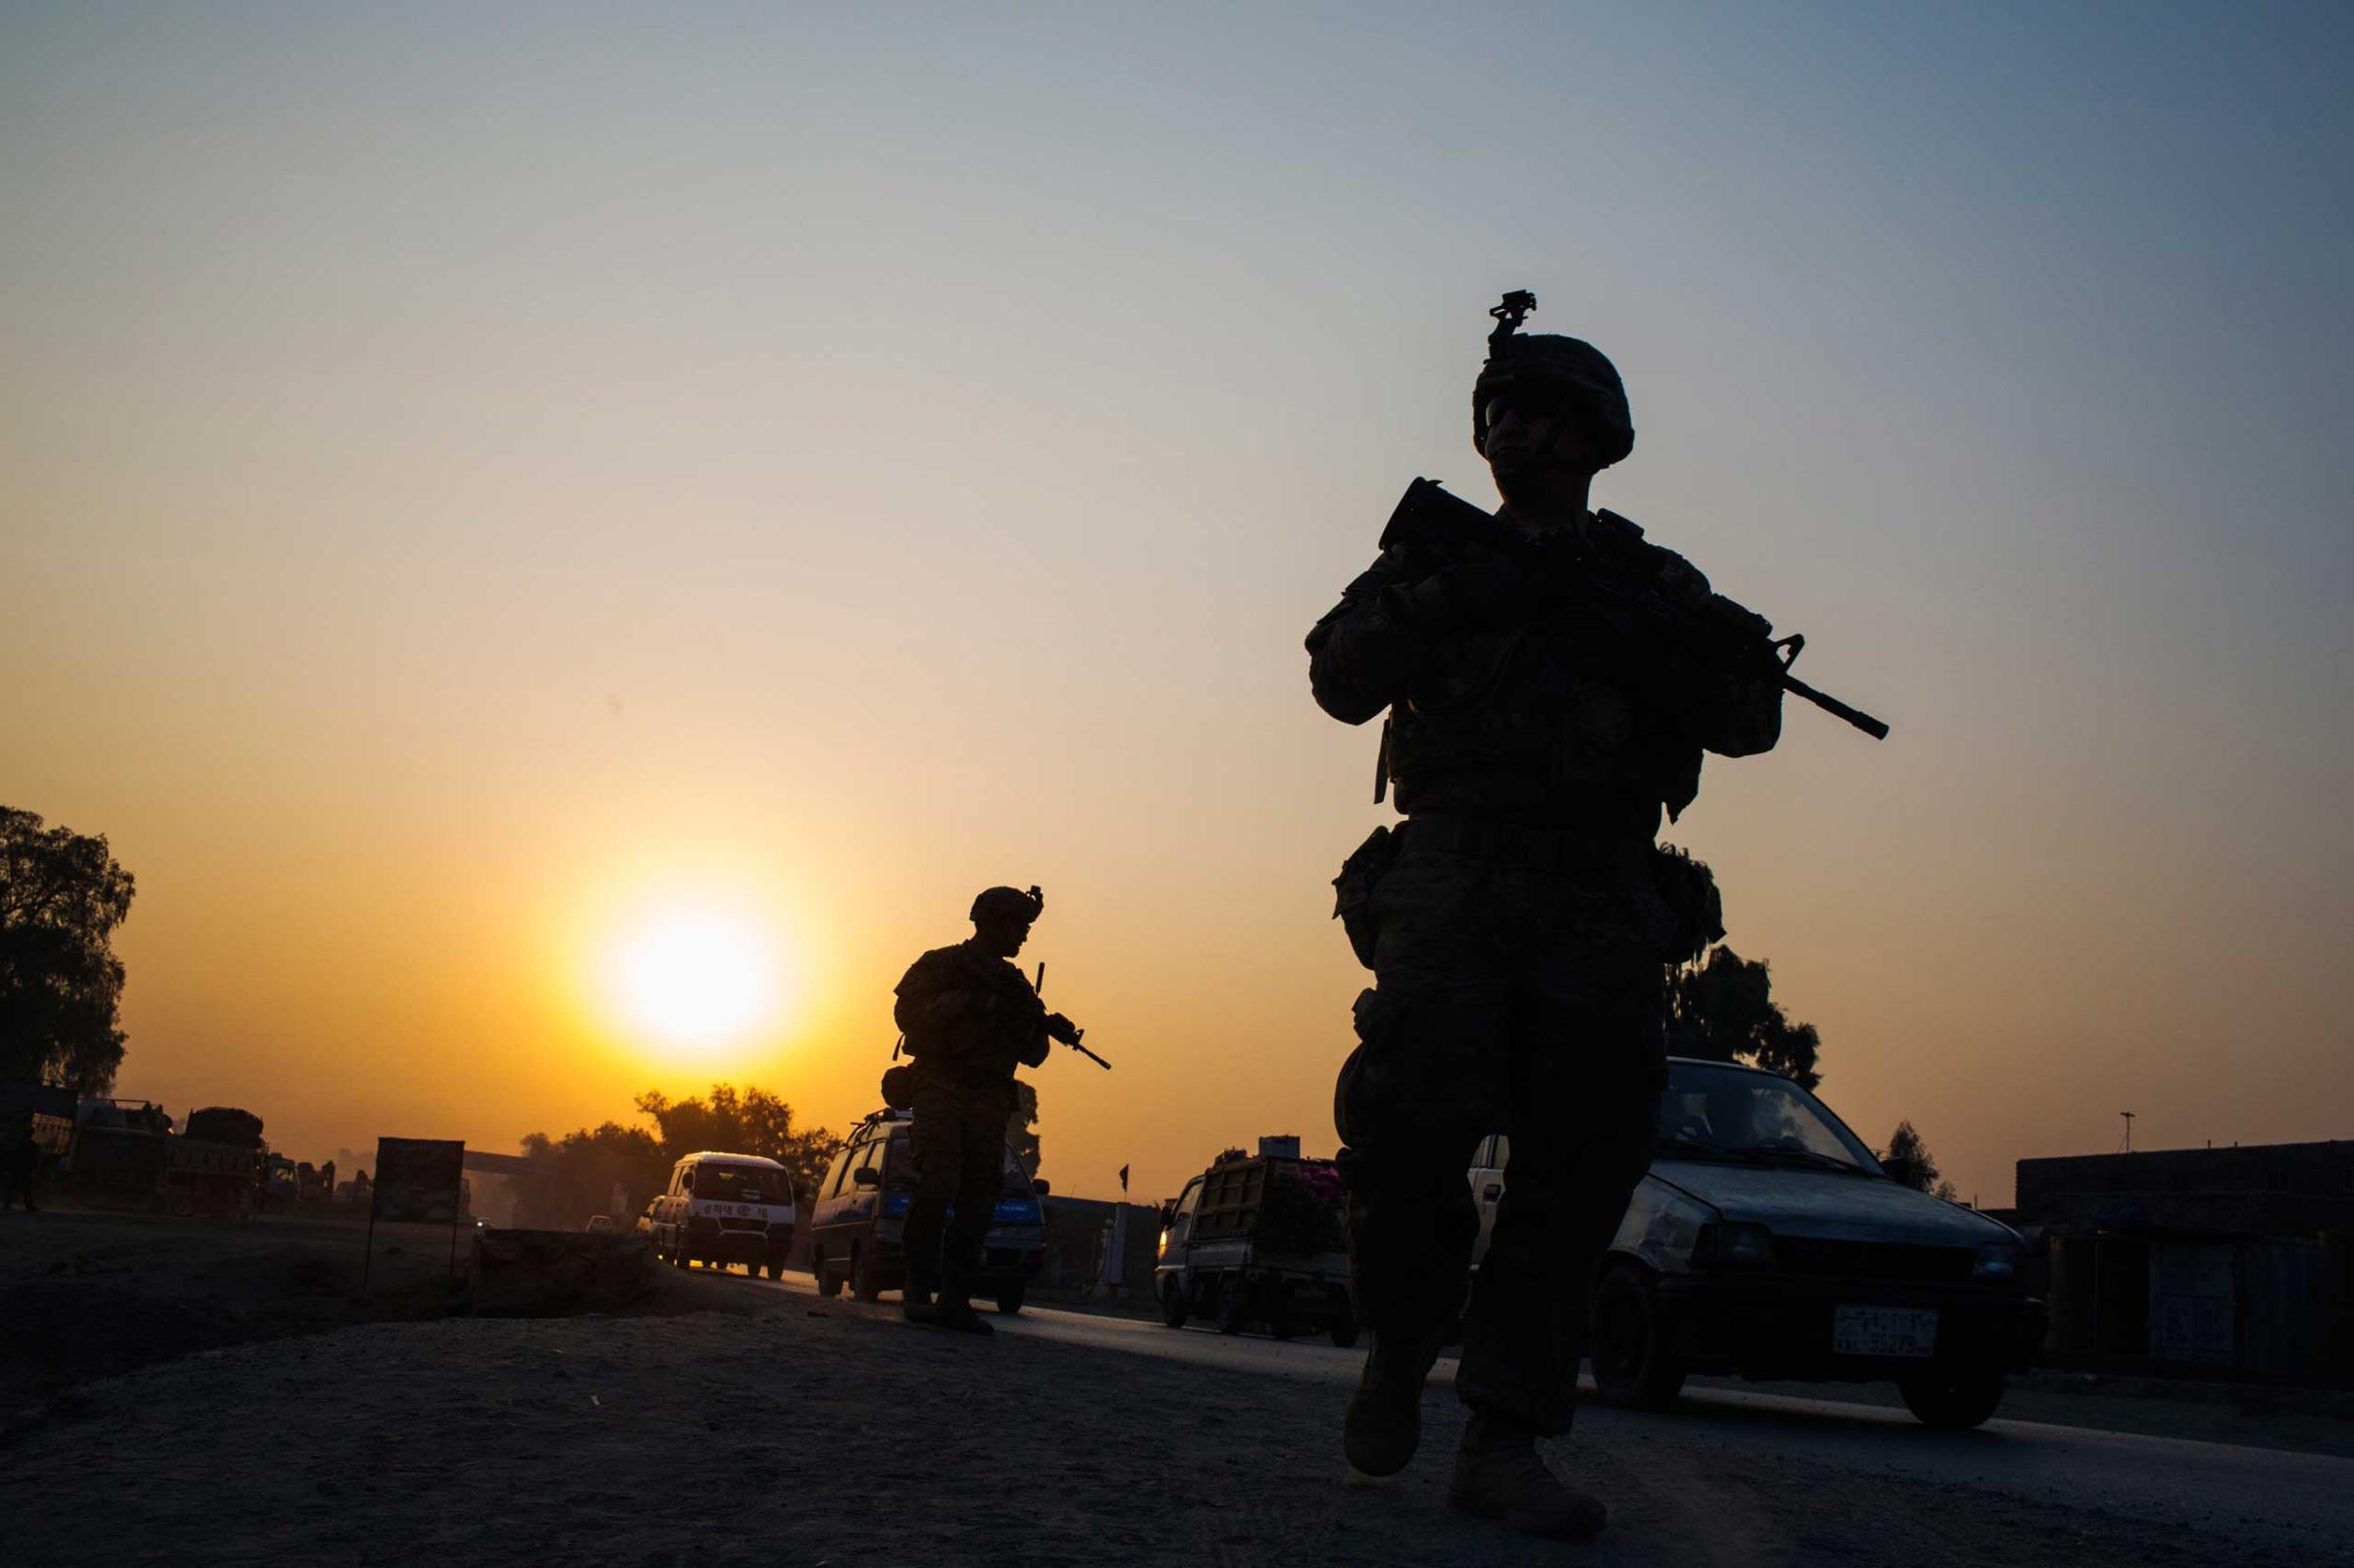 U.S. soldiers from Grim Company of the 3rd Cavalry Regiment walk down the street near an Afghan police checkpoint during a mission near Forward Operating Base Fenty in the Nangarhar province of Afghanistan